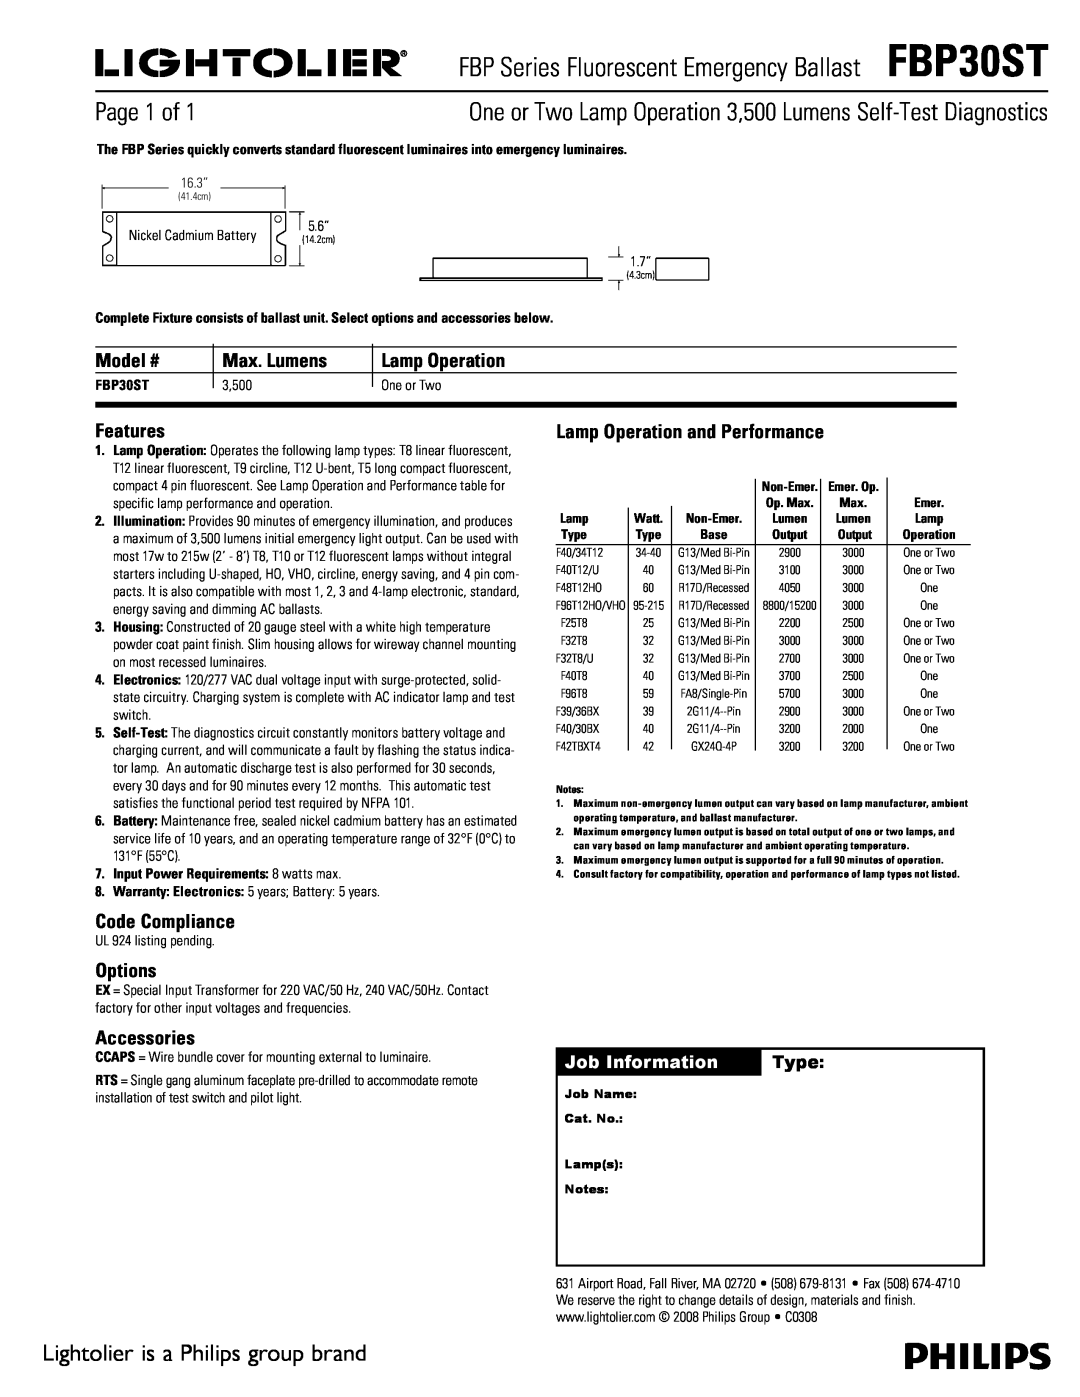 Lightolier FBP30ST warranty Page 1 of, Lightolier is a Philips group brand, Model #, Max. Lumens, Lamp Operation, Features 